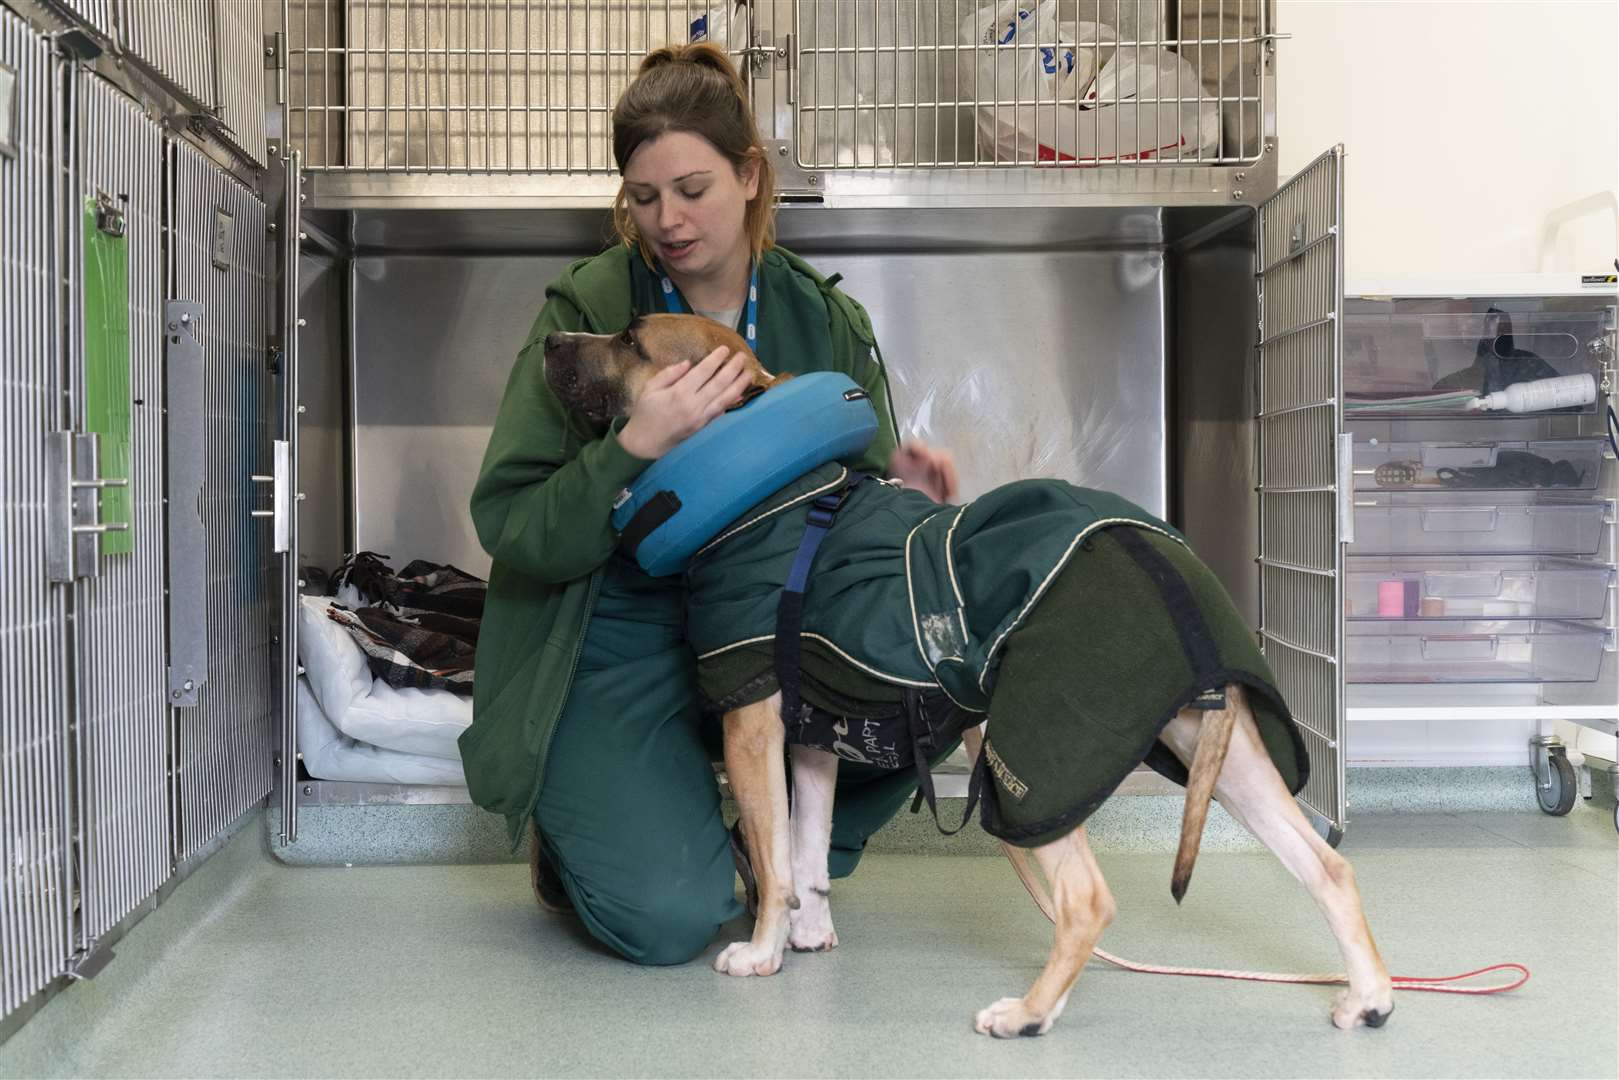 The RSPCA is continuing its vital work looking after sick and abandoned animals